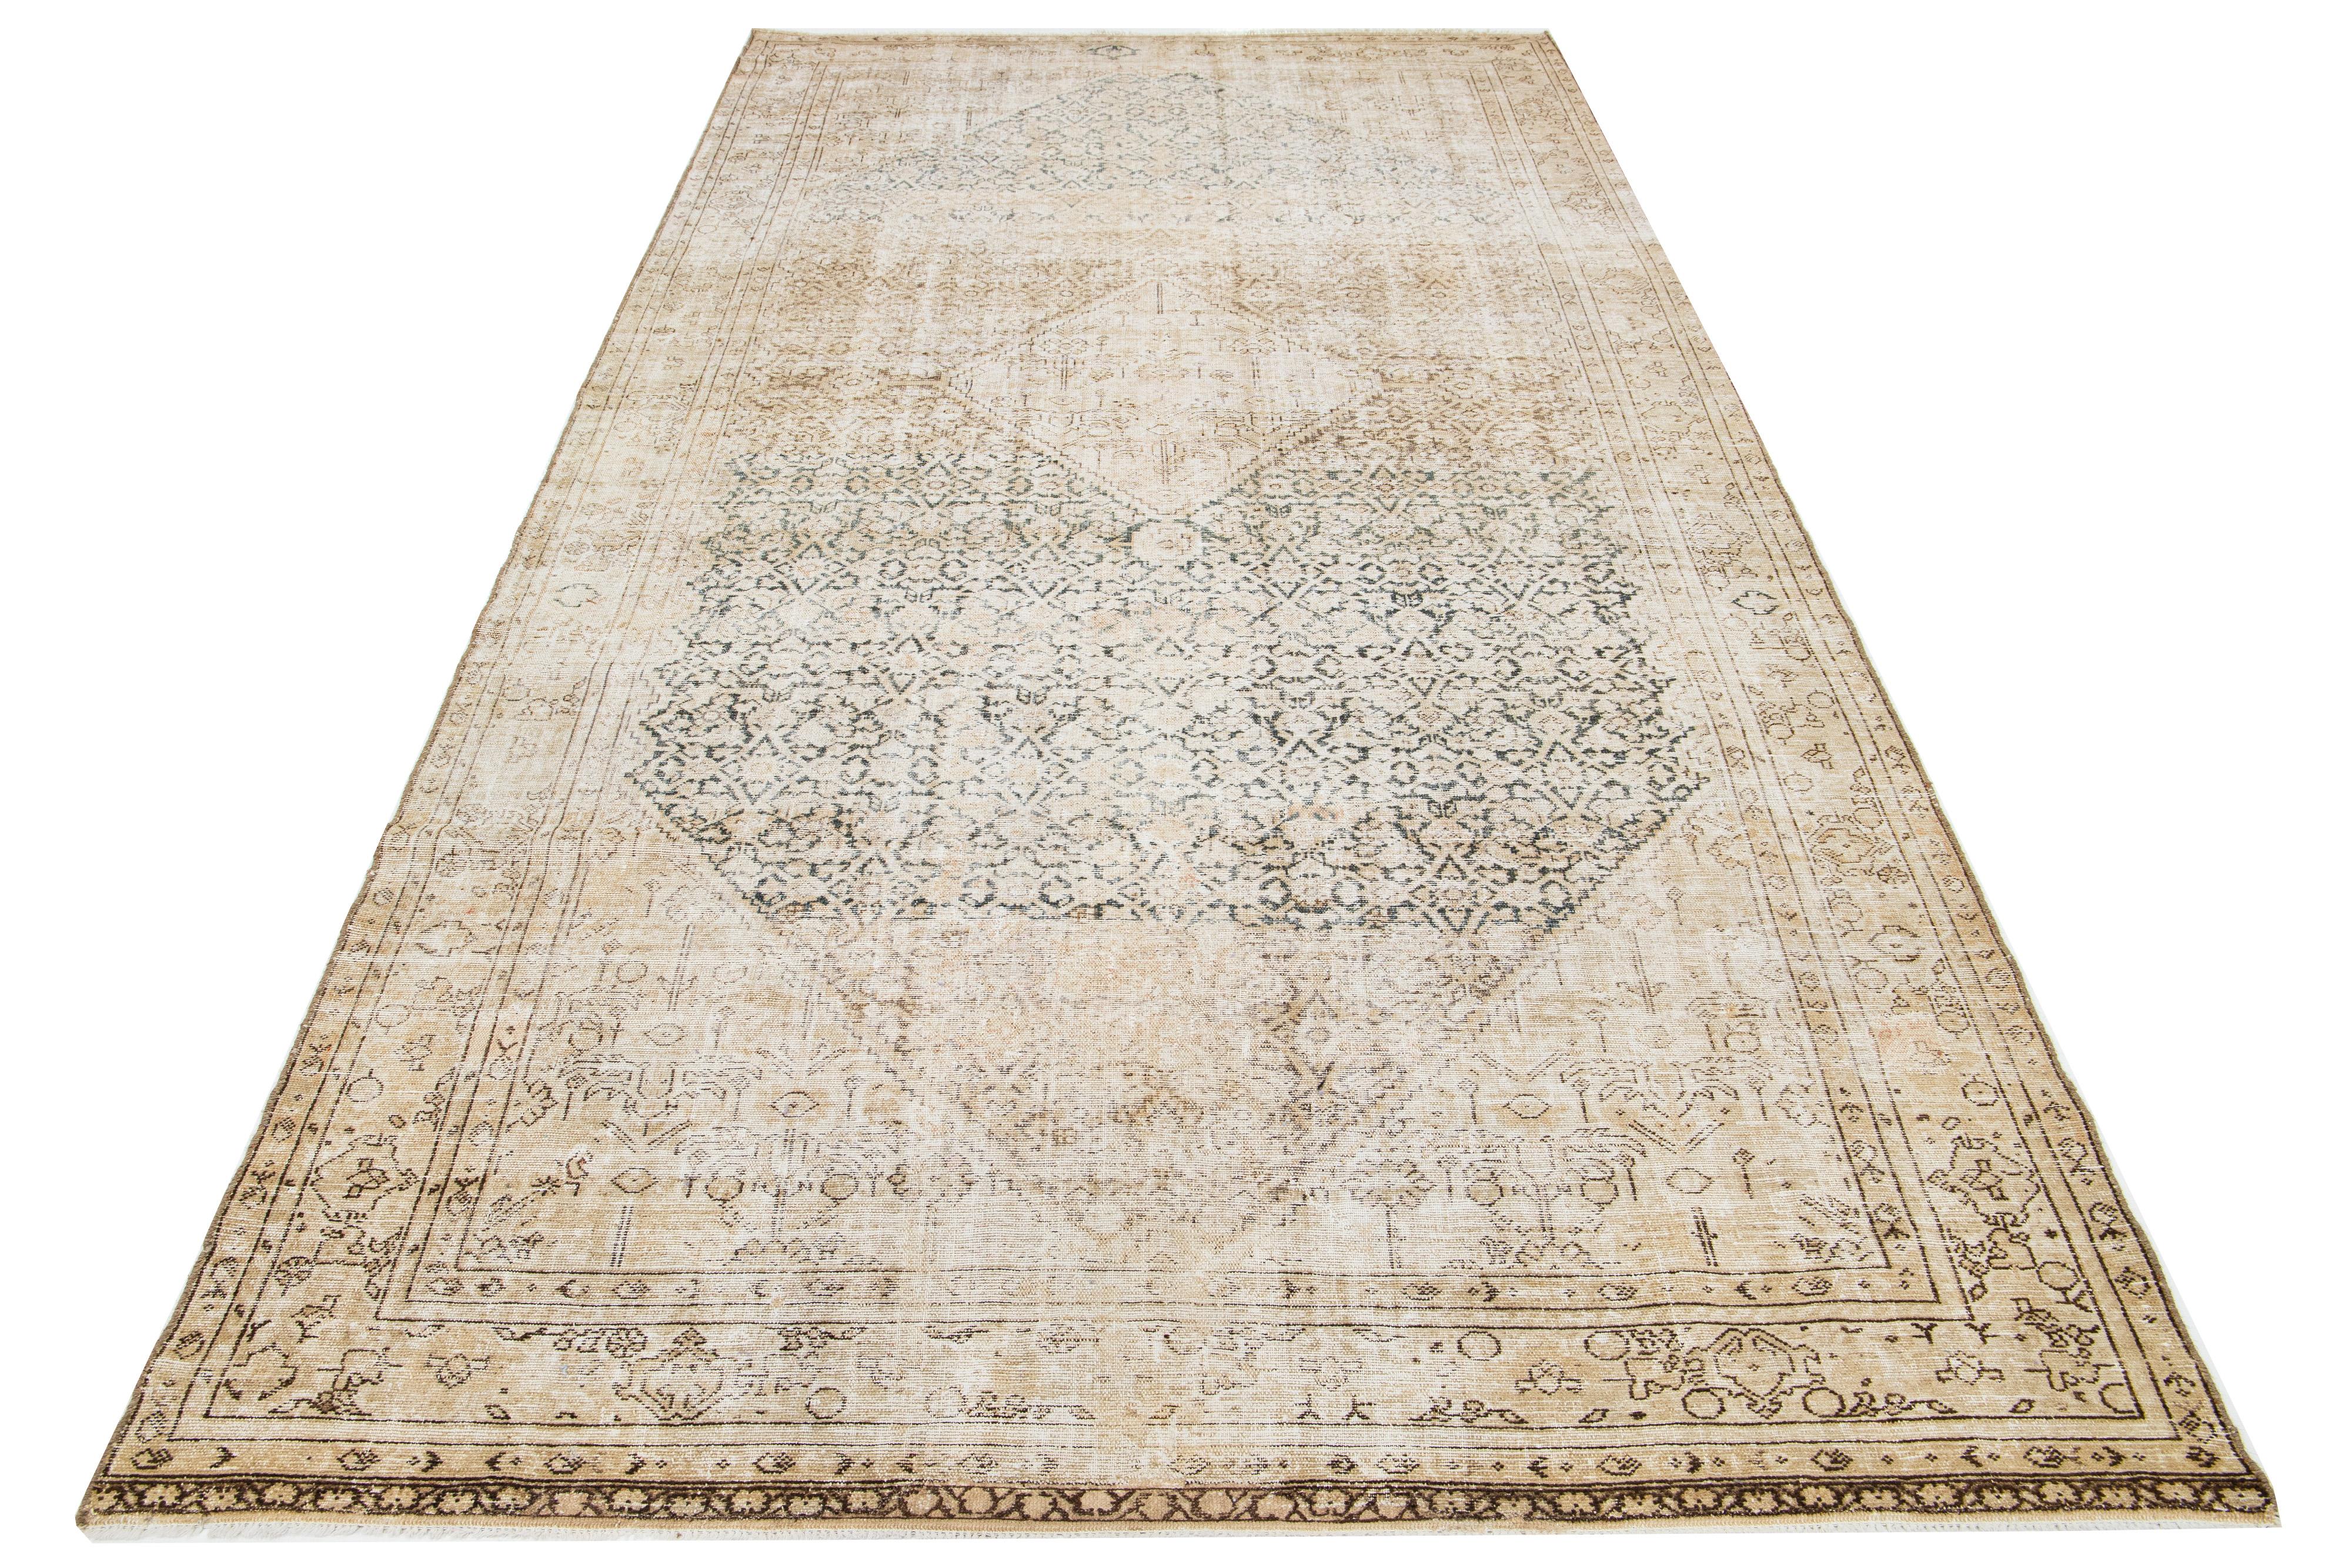 This is a handmade Persian Malayer wool rug from the 20th century. The rug has a beige background with woven brown and blue accents throughout its design.

This rug measures 6'4